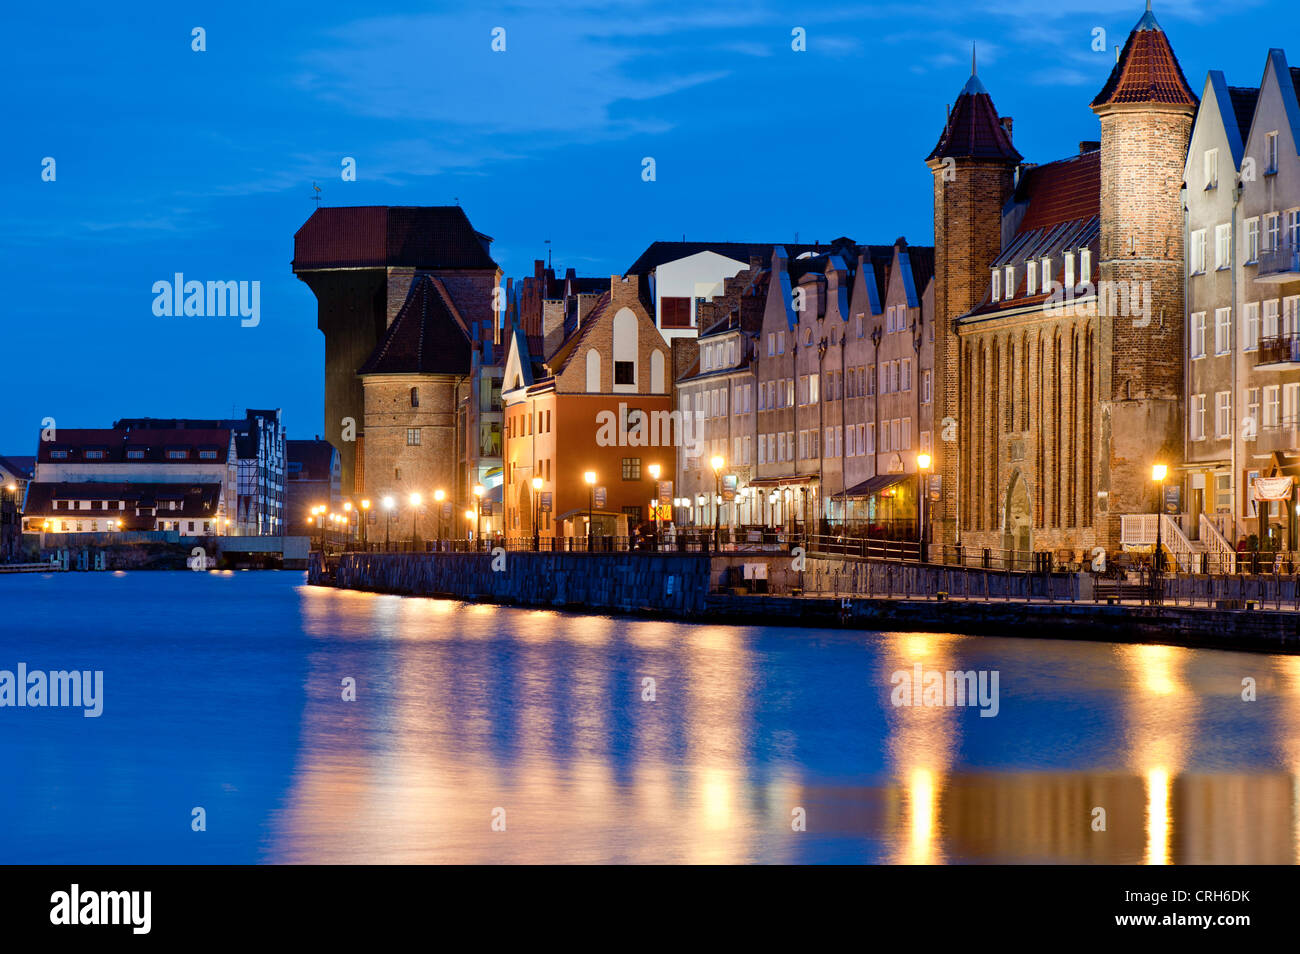 View of Old Town architecture by Motlawa River at night, Gdansk, Poland Stock Photo